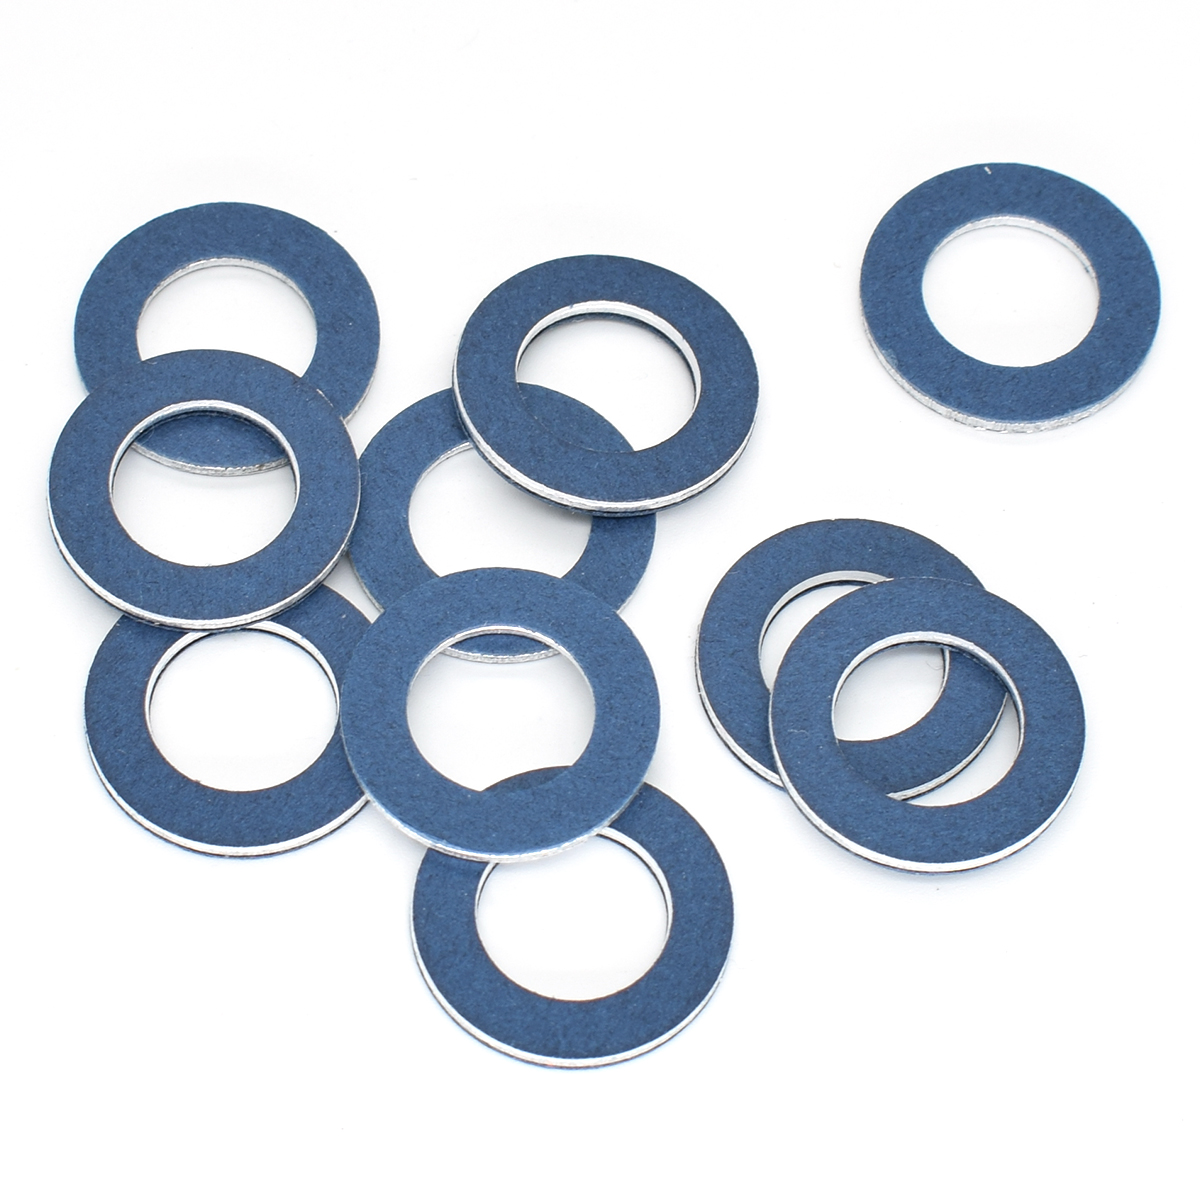 HouYeen Oil Drain Sump Plug Washers Gasket Seal Ring for T-oyota L-exus 90430-12031 9043012031 Pack of 10 